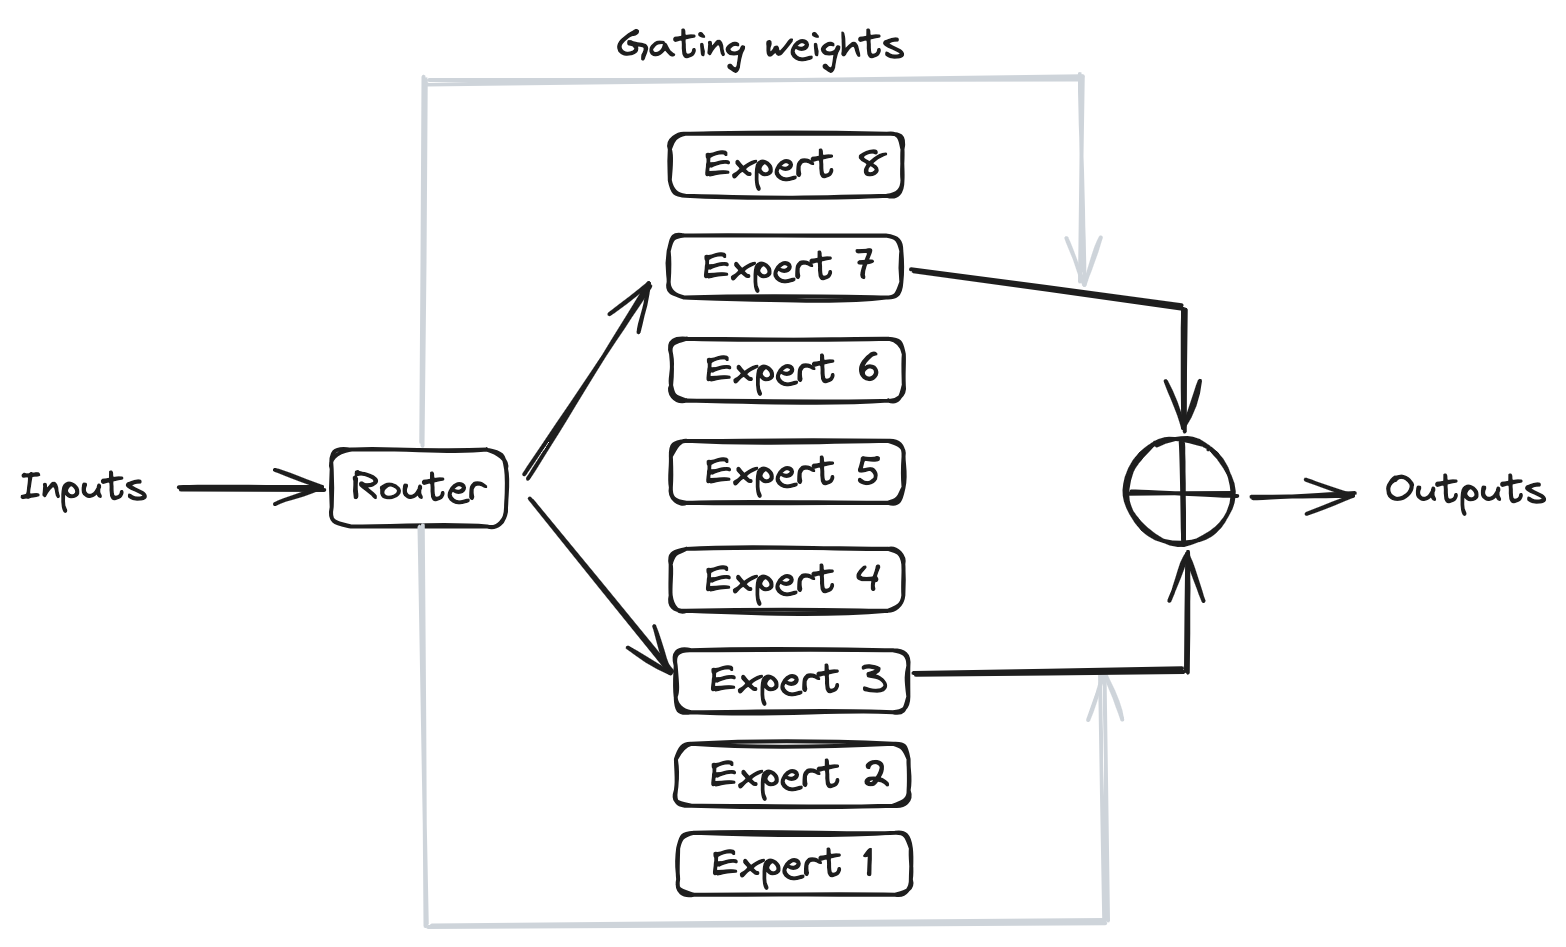 MoE mixtral experts gating weights diagram || '